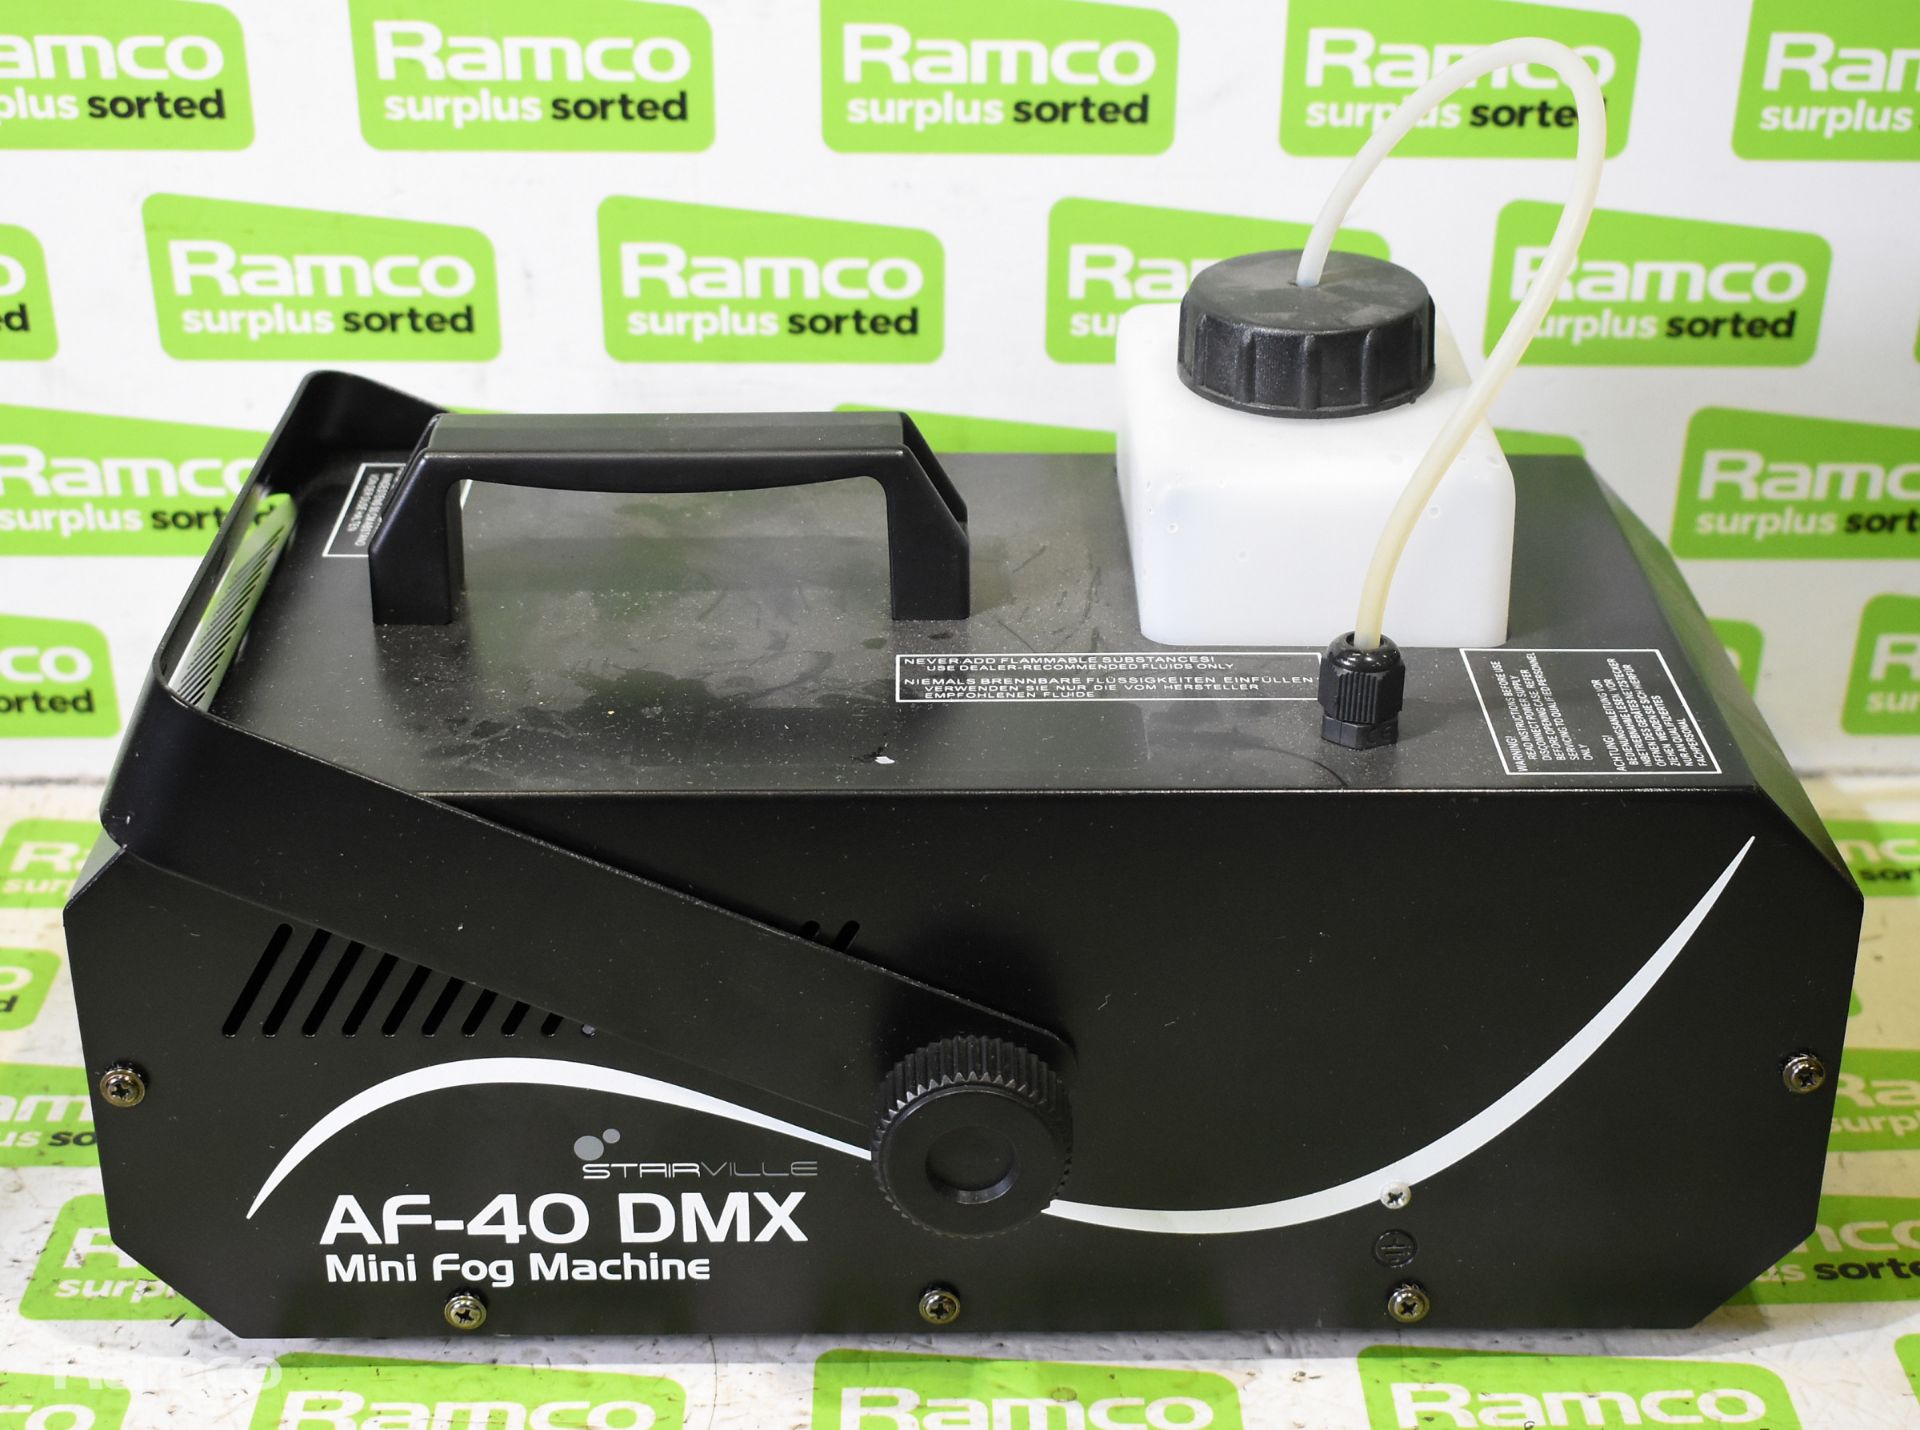 Stairville AF-40 DMX mini fog machine with remote - Image 4 of 7